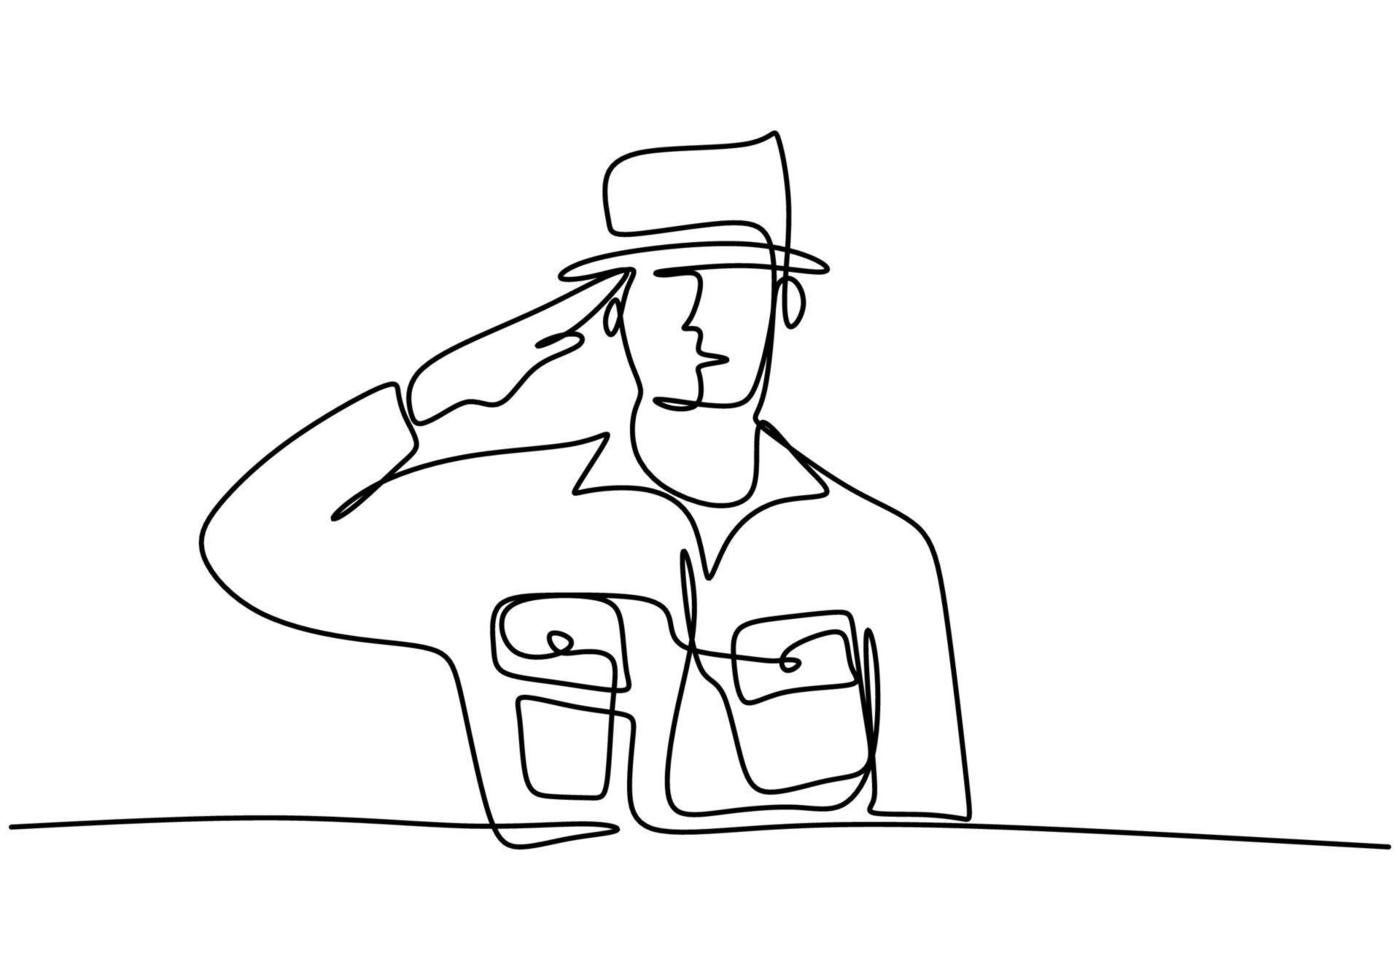 Continuous one single line drawing of a police major. Police officer with uniform. vector